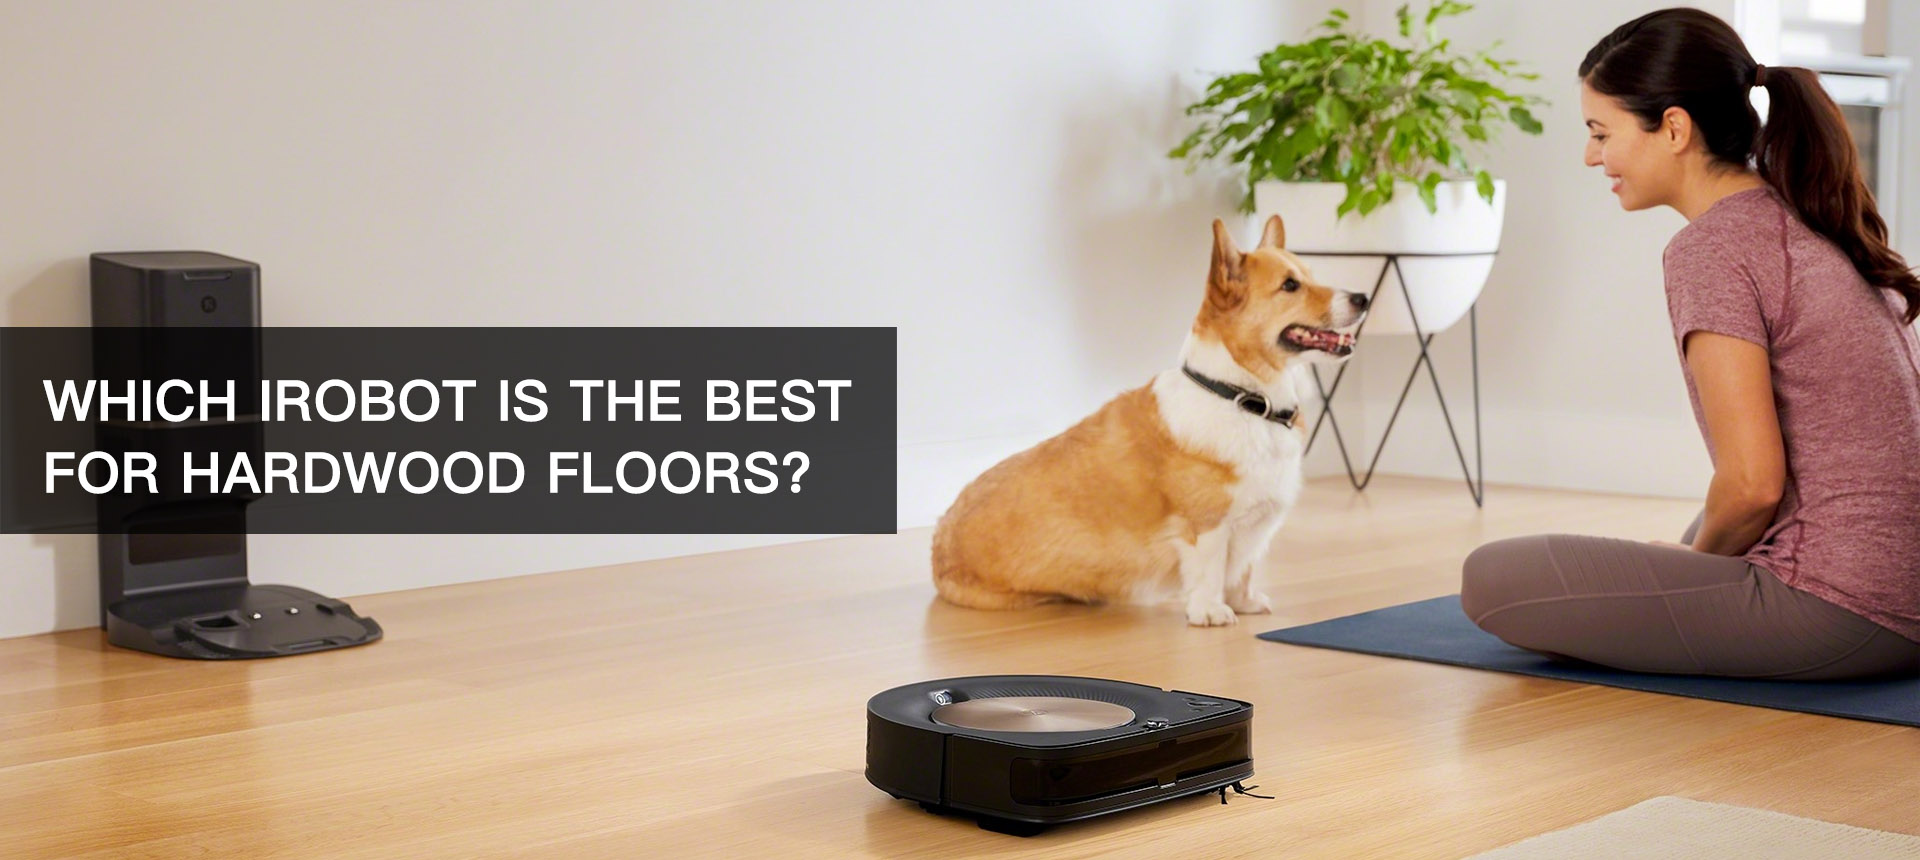 Which iRobot is the Best for Hardwood Floors